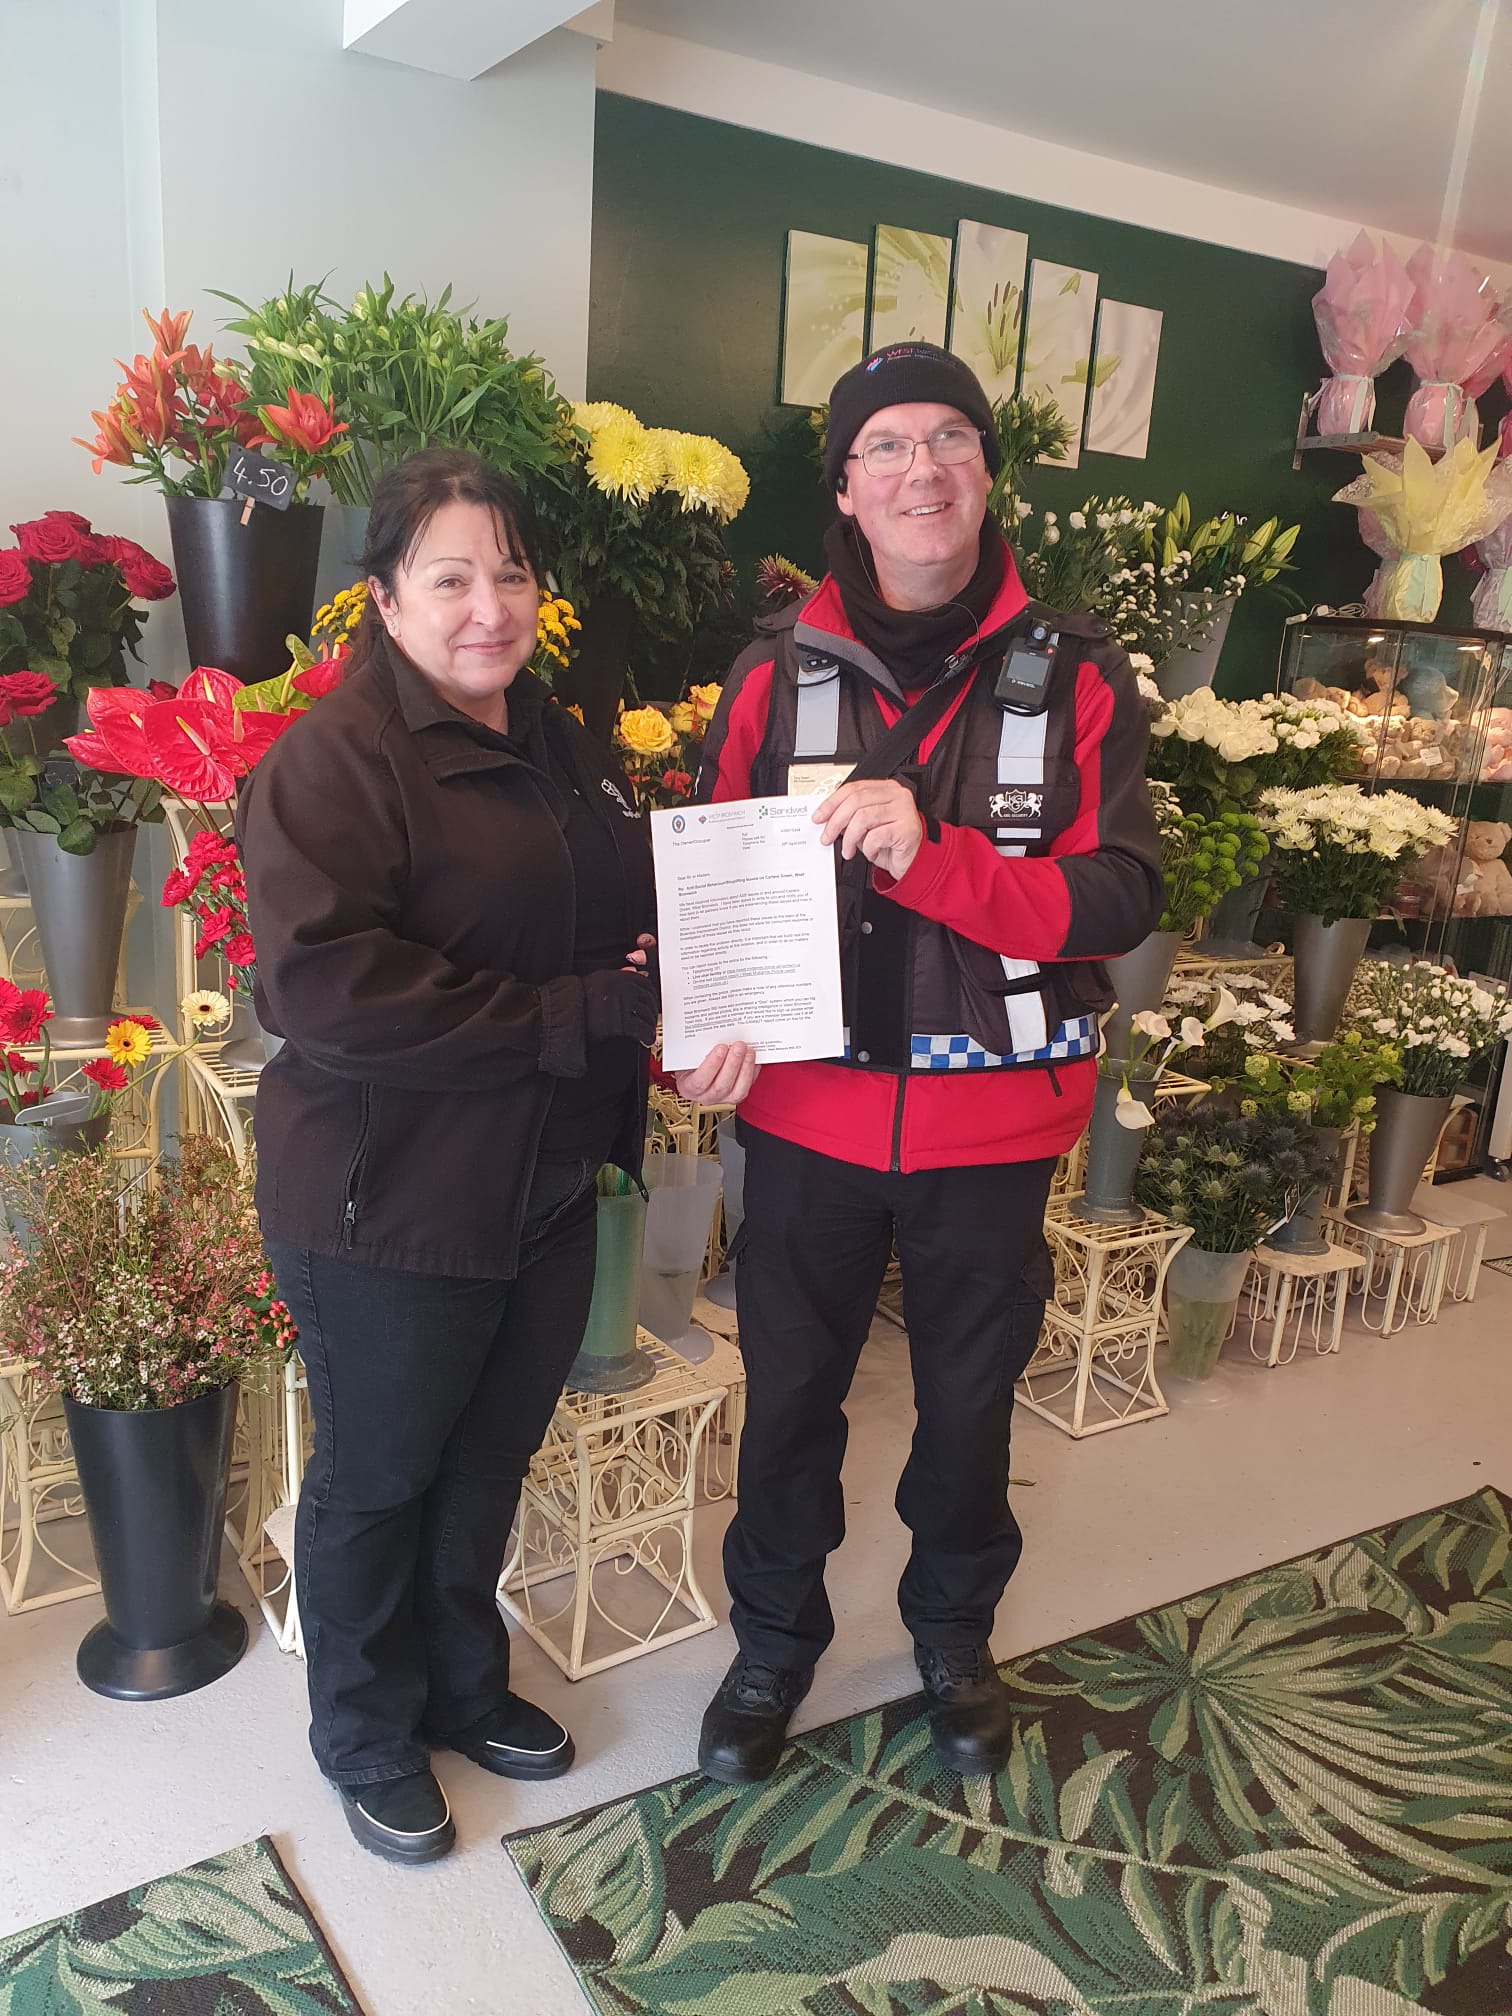 Today Billinghams Florist located on 462 High St, West Bromwich B70 9LD have received their letter on how to report any Antisocial Behavior